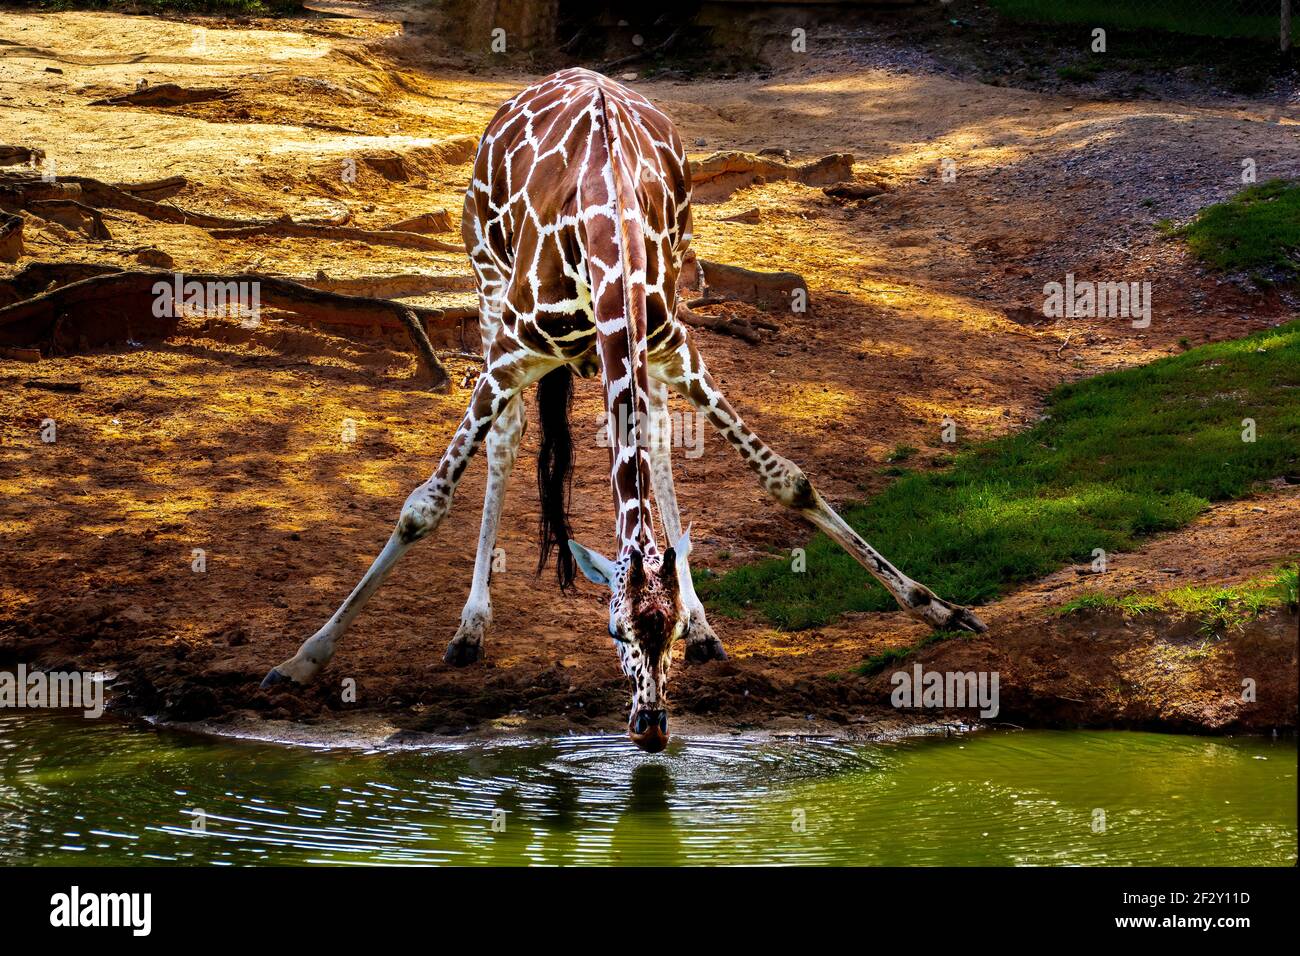 The reticulated giraffe (Giraffa camelopardalis reticulata), also known as the Somali giraffe, is a subspecies of giraffe native to the Horn of Africa Stock Photo